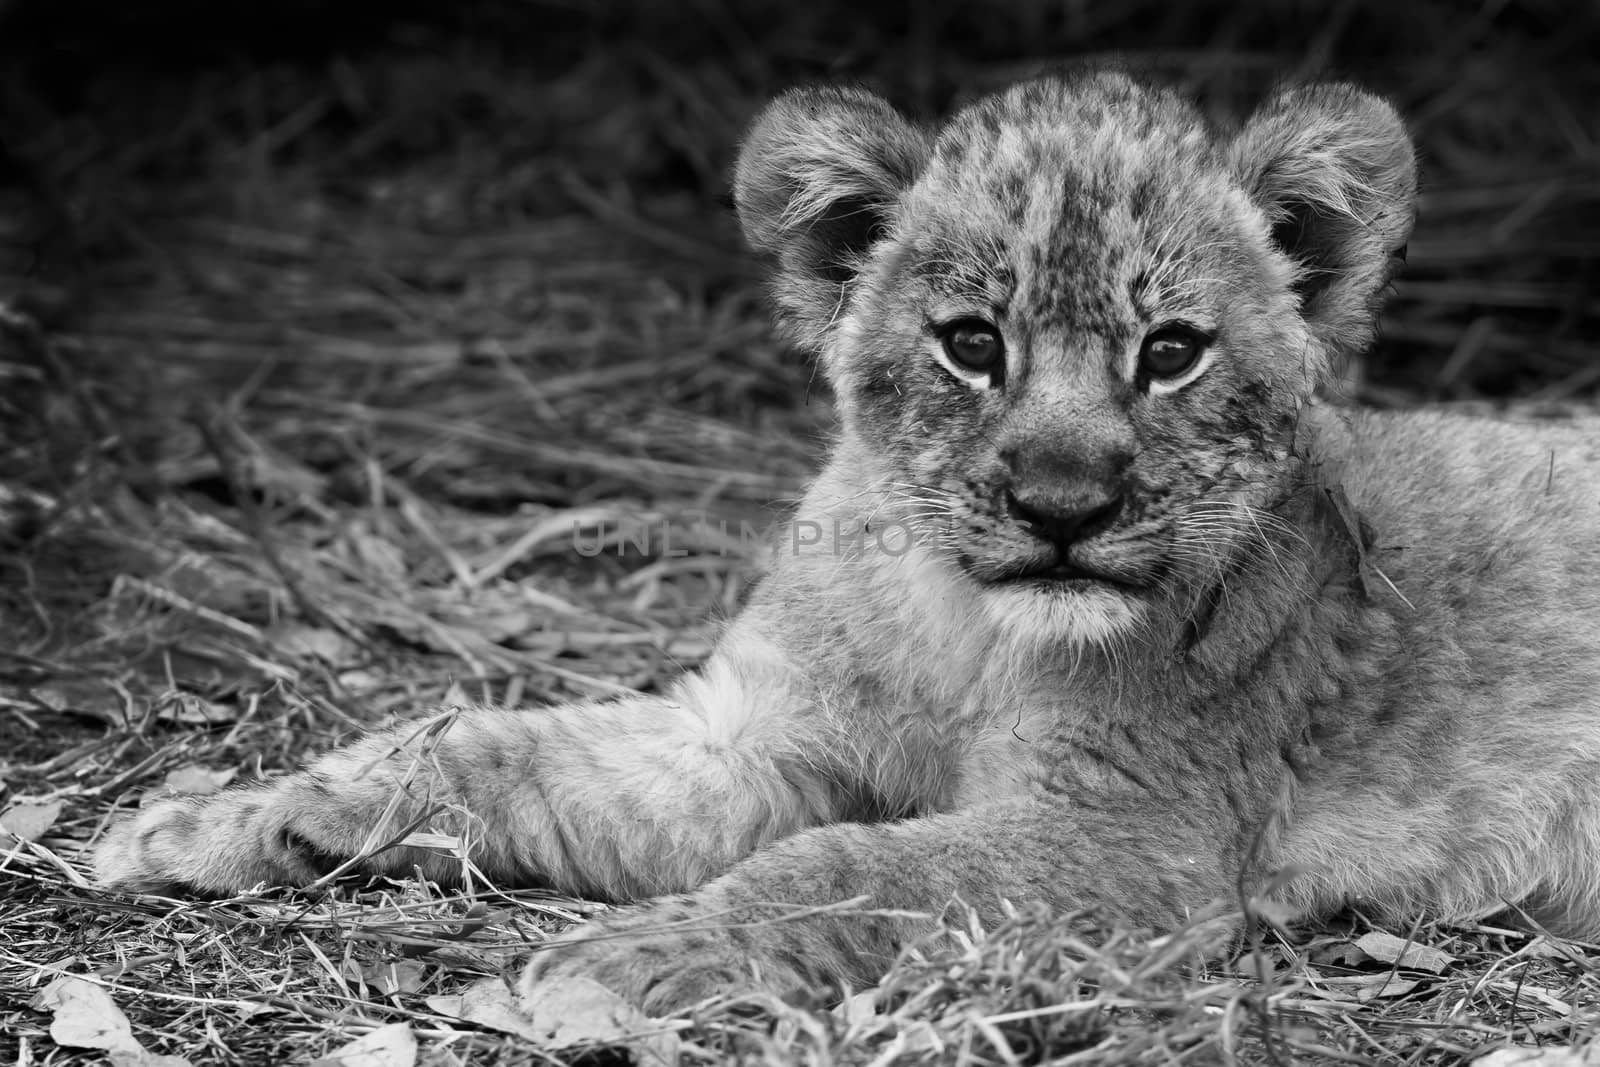 Cute Lion cub in black and white by donvanstaden